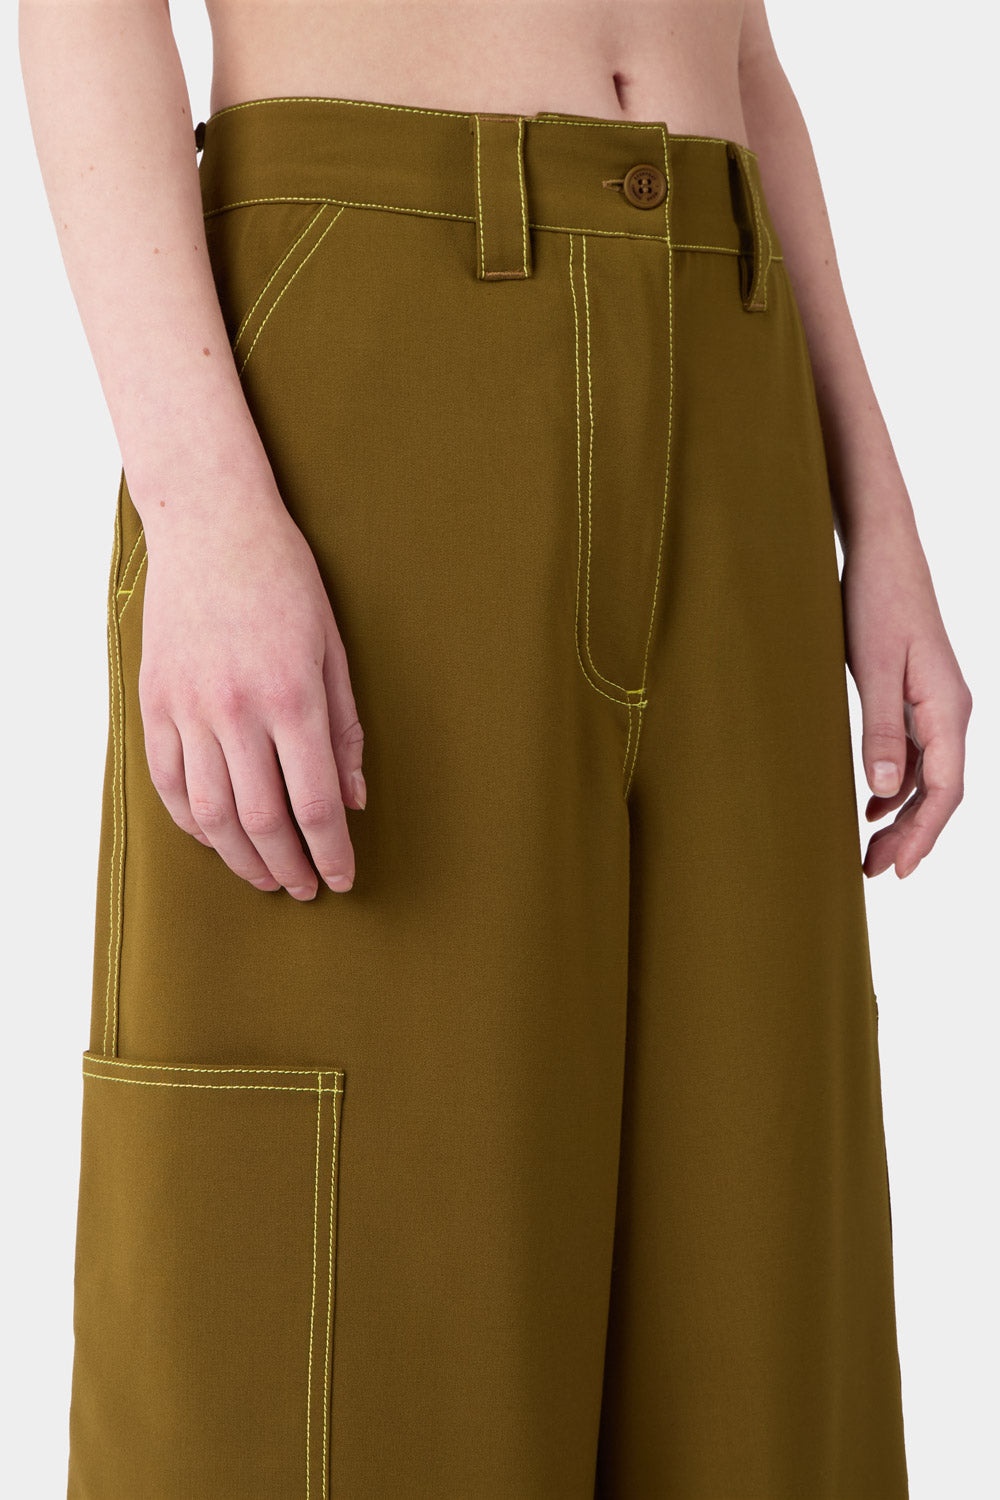 FIT LOOSE PANTS / olive green - 4